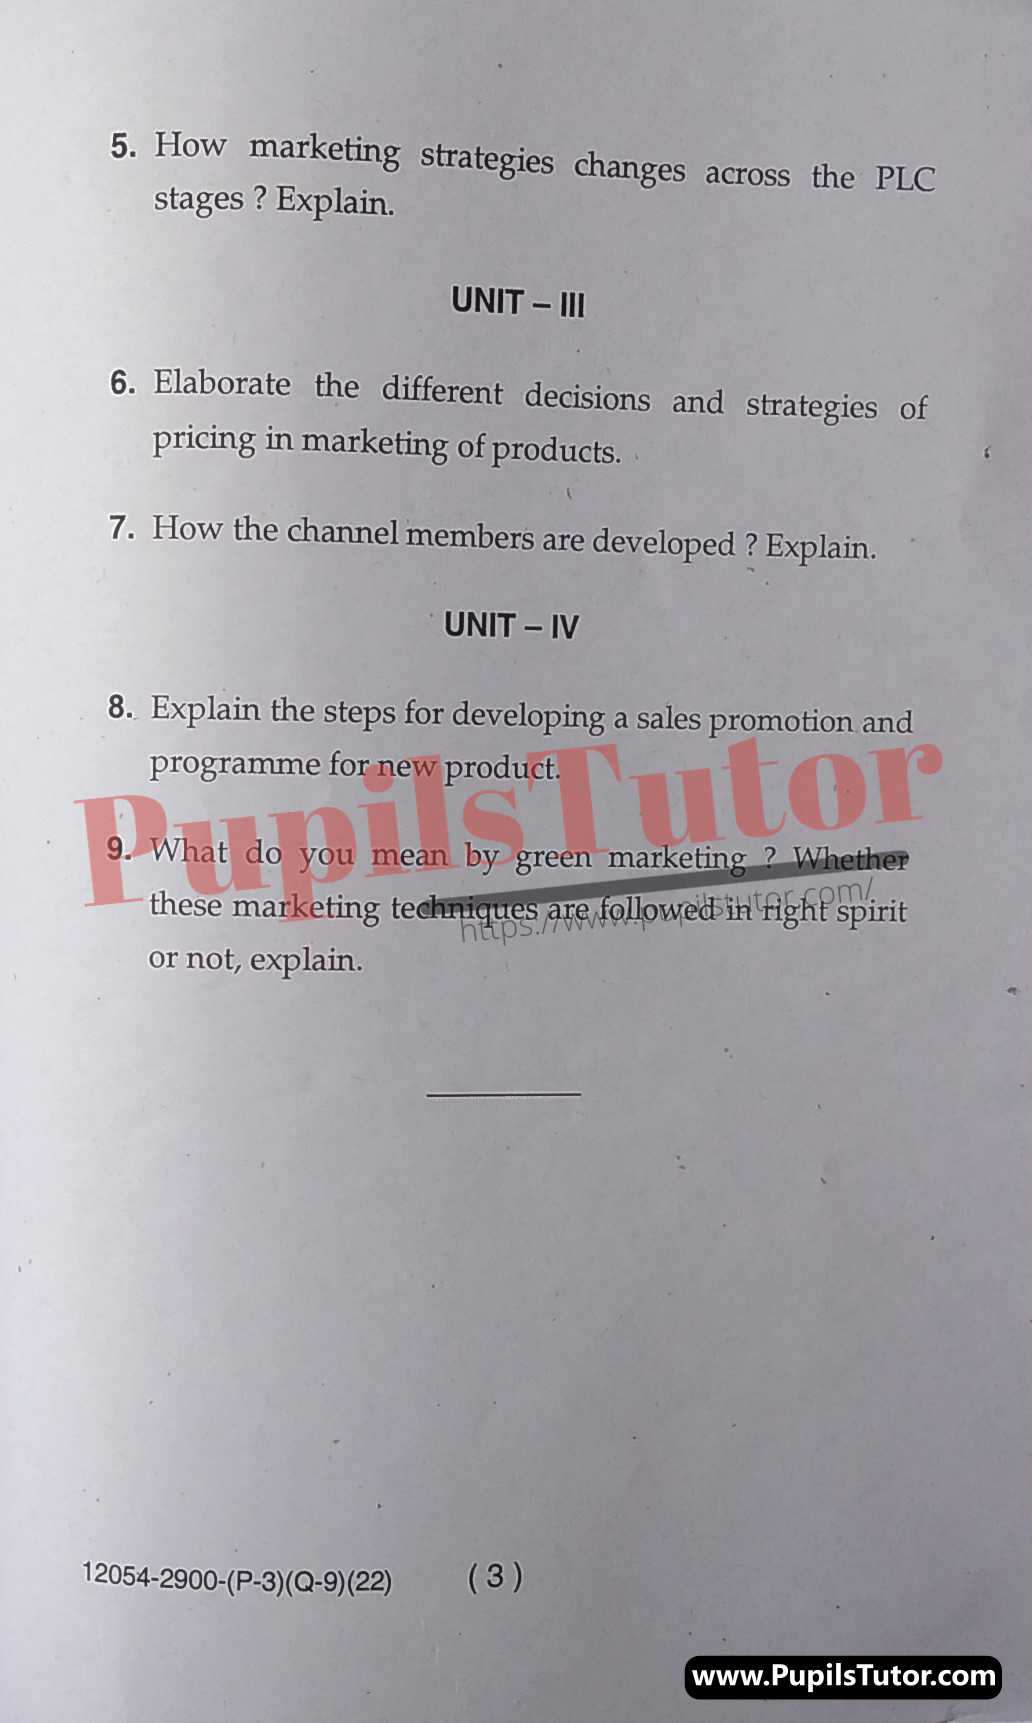 Free Download PDF Of M.D. University MBA Third Semester Latest Question Paper For Fundamental Of Marketing Subject (Page 3) - https://www.pupilstutor.com